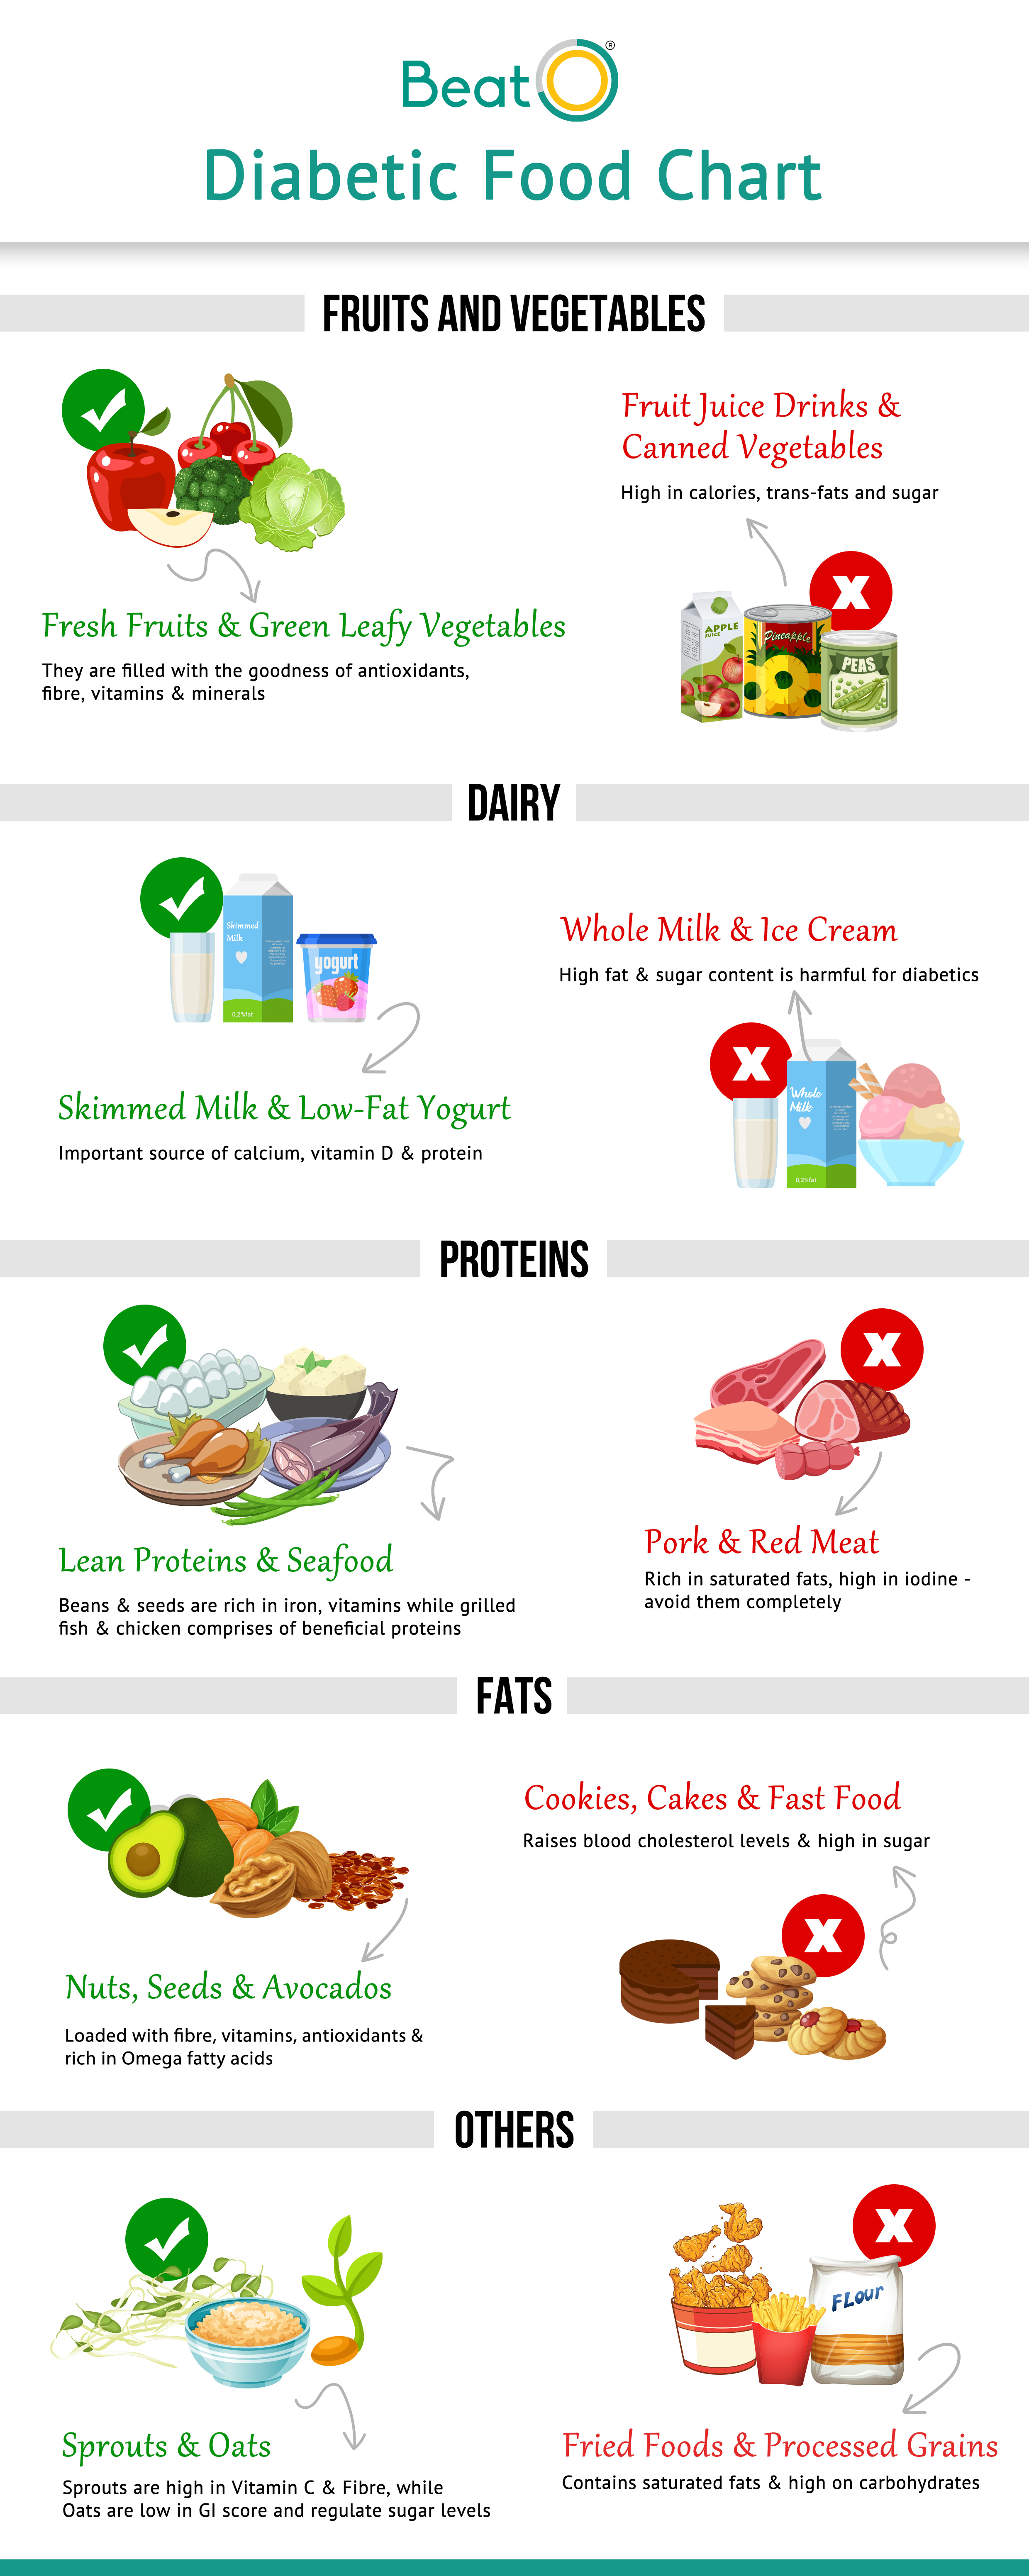 Diabetic Diet Chart: A Complete Guide to Control Diabetes